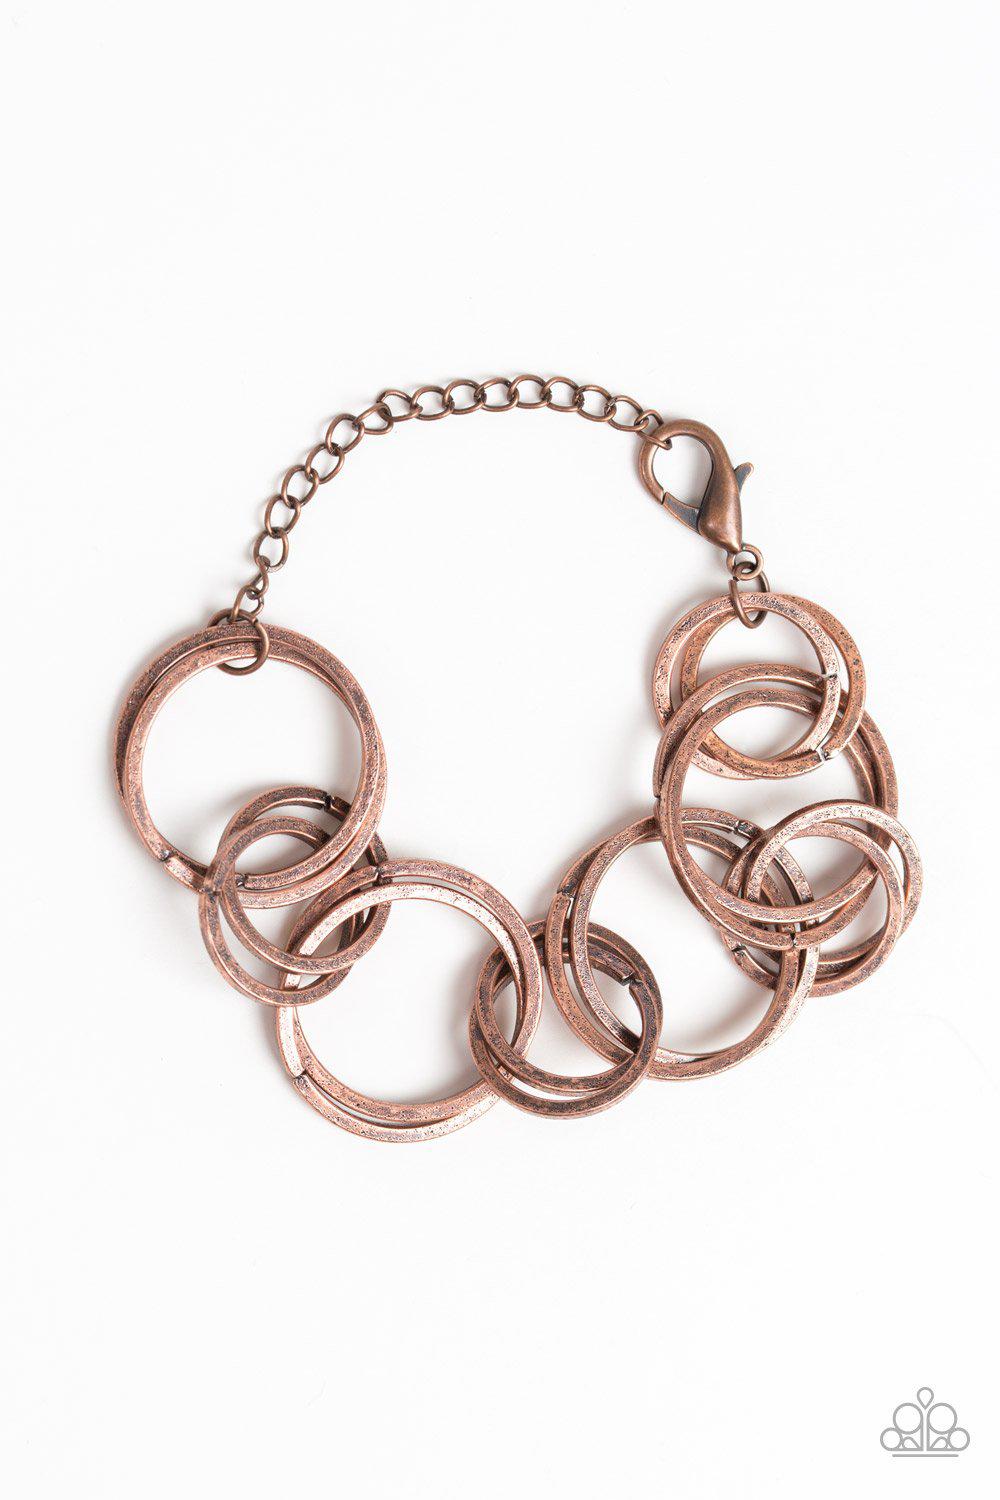 Give Me A Ring Copper Bracelet - Paparazzi Accessories-CarasShop.com - $5 Jewelry by Cara Jewels